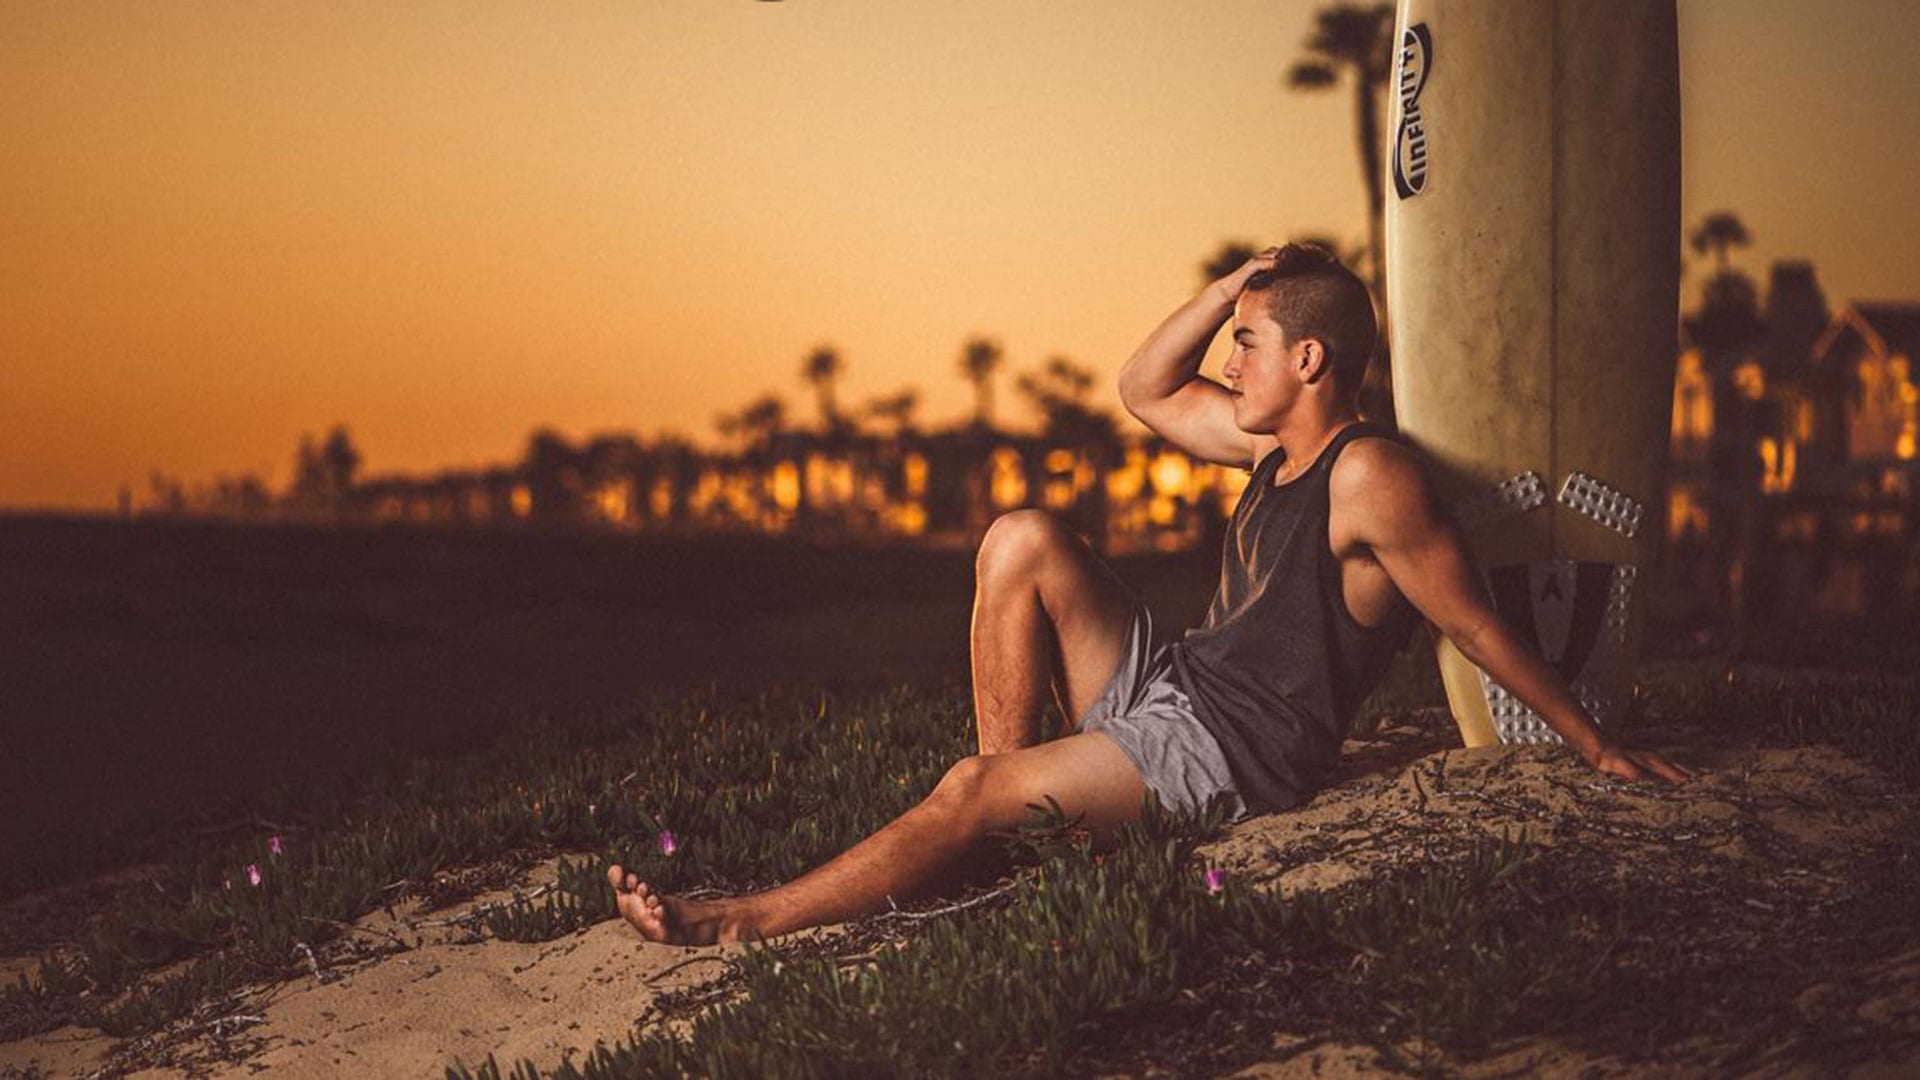 Young guy wearing a black tank top and gray shorts leaning against a surfboard looking off to the distance at dusk